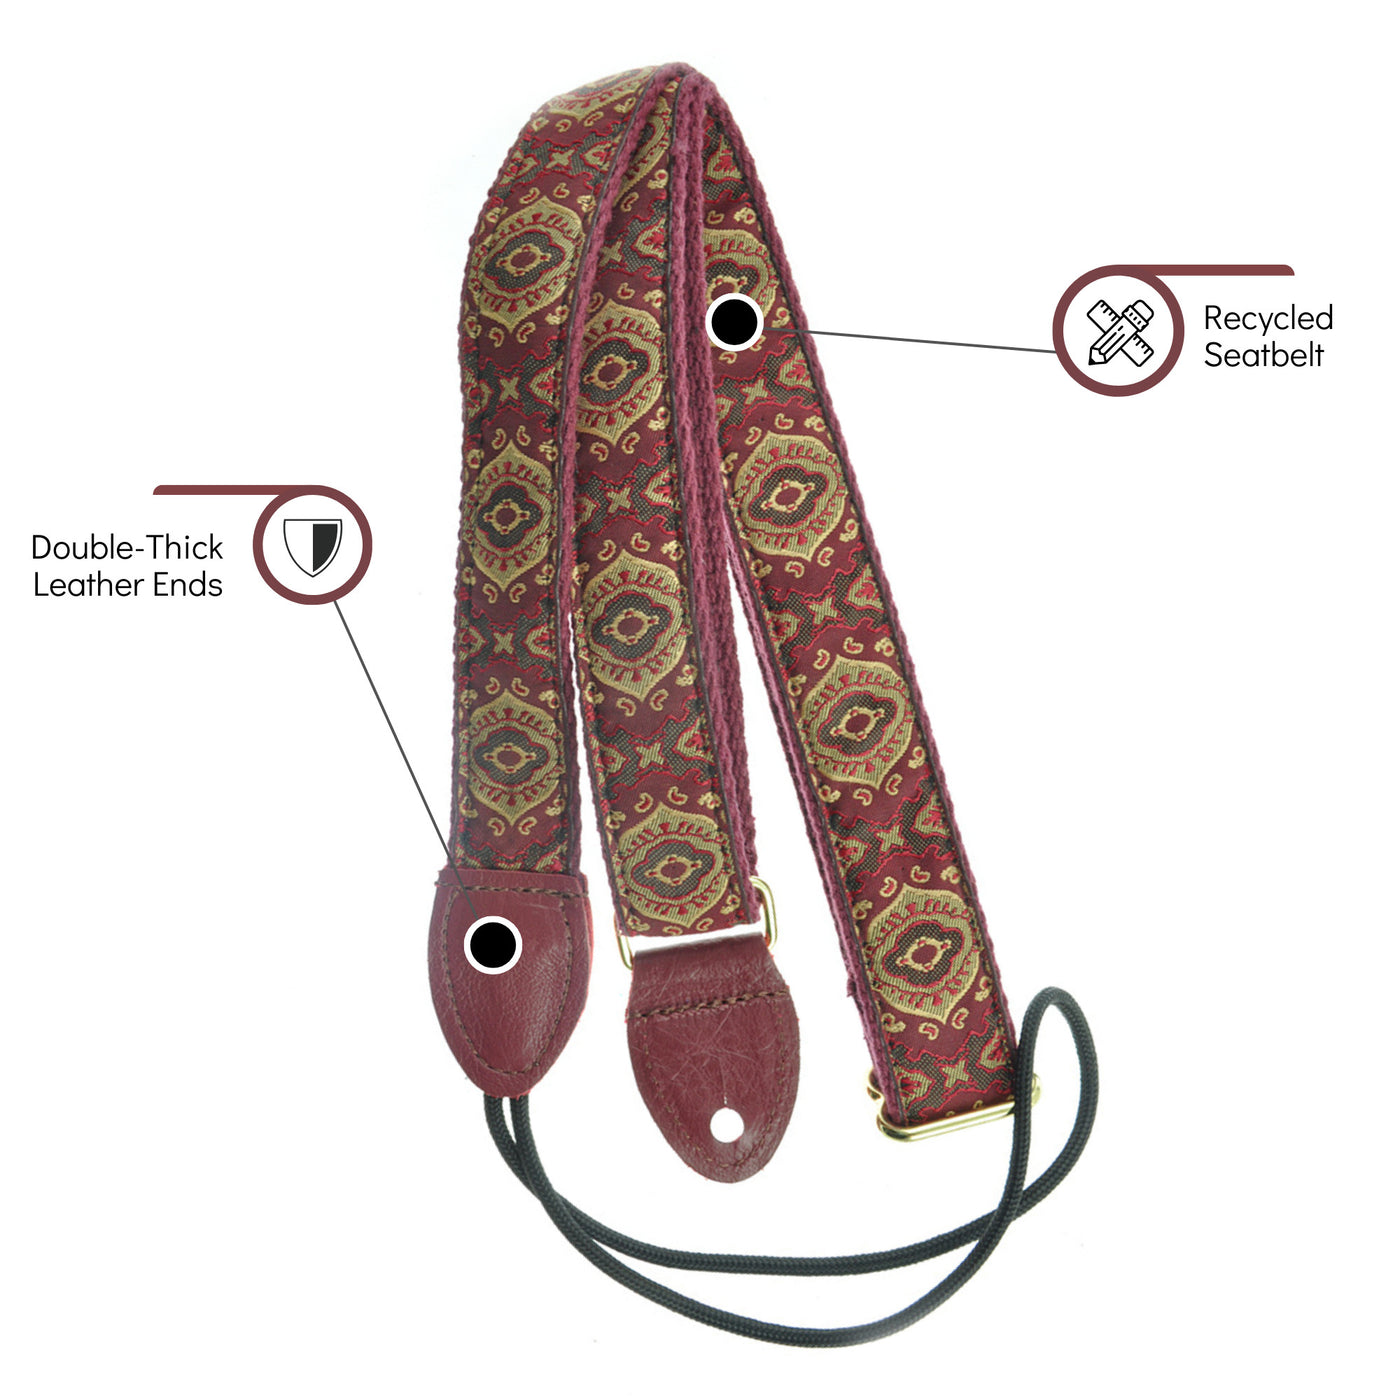 Souldier FMDA0640BD05BD - Handmade Souldier Fabric F-Style Mandolin Straps, 1 Inch Width and Adjustable Length, Maroon